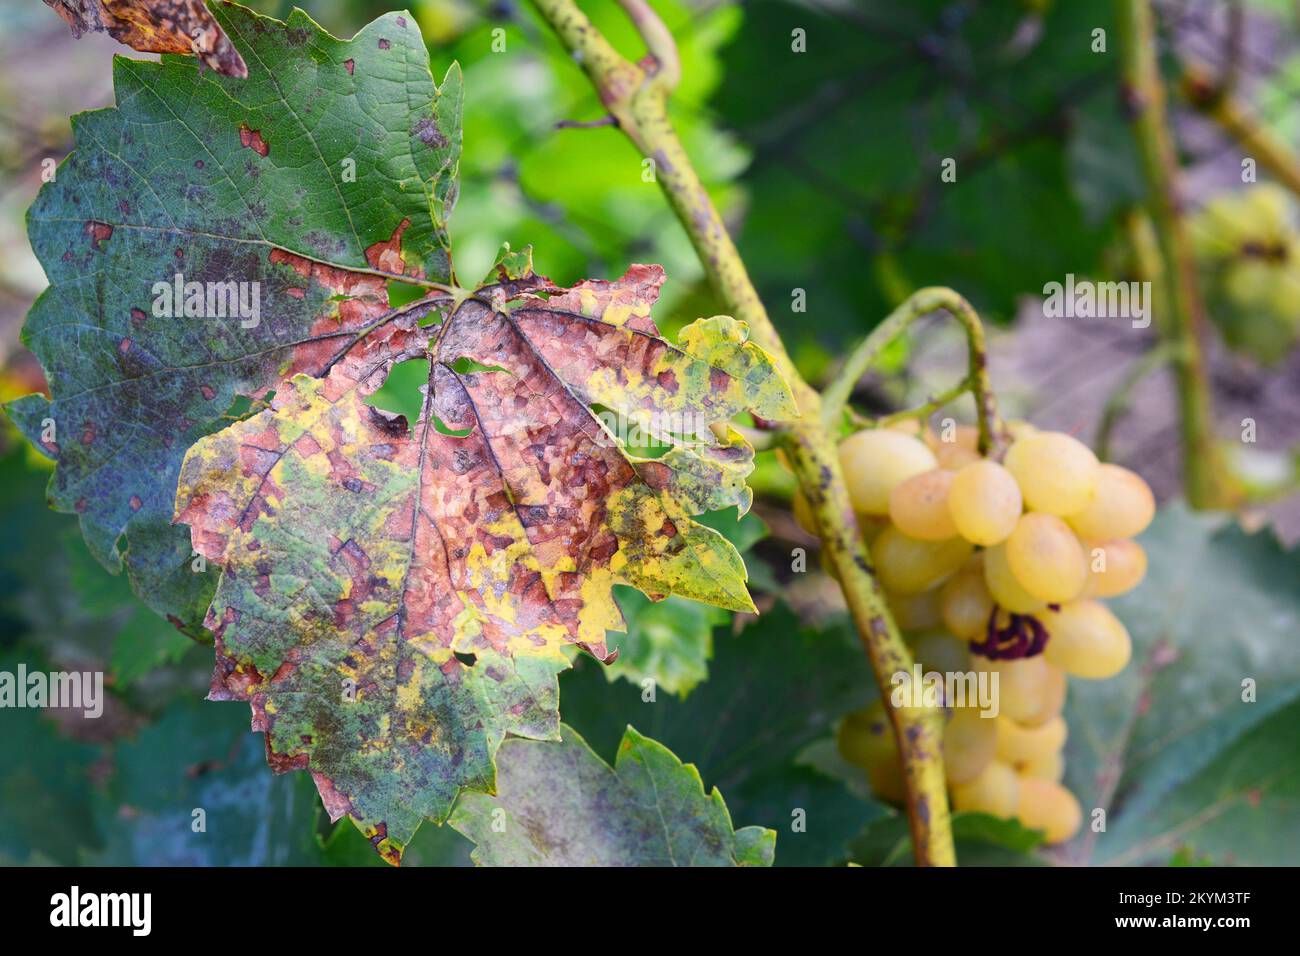 Anthracnose of grapes, fungus disease. Anthracnose of grapes, caused by the fungus Elsinoe ampelina, is a serious disease of home-grown grapes. Anthra Stock Photo